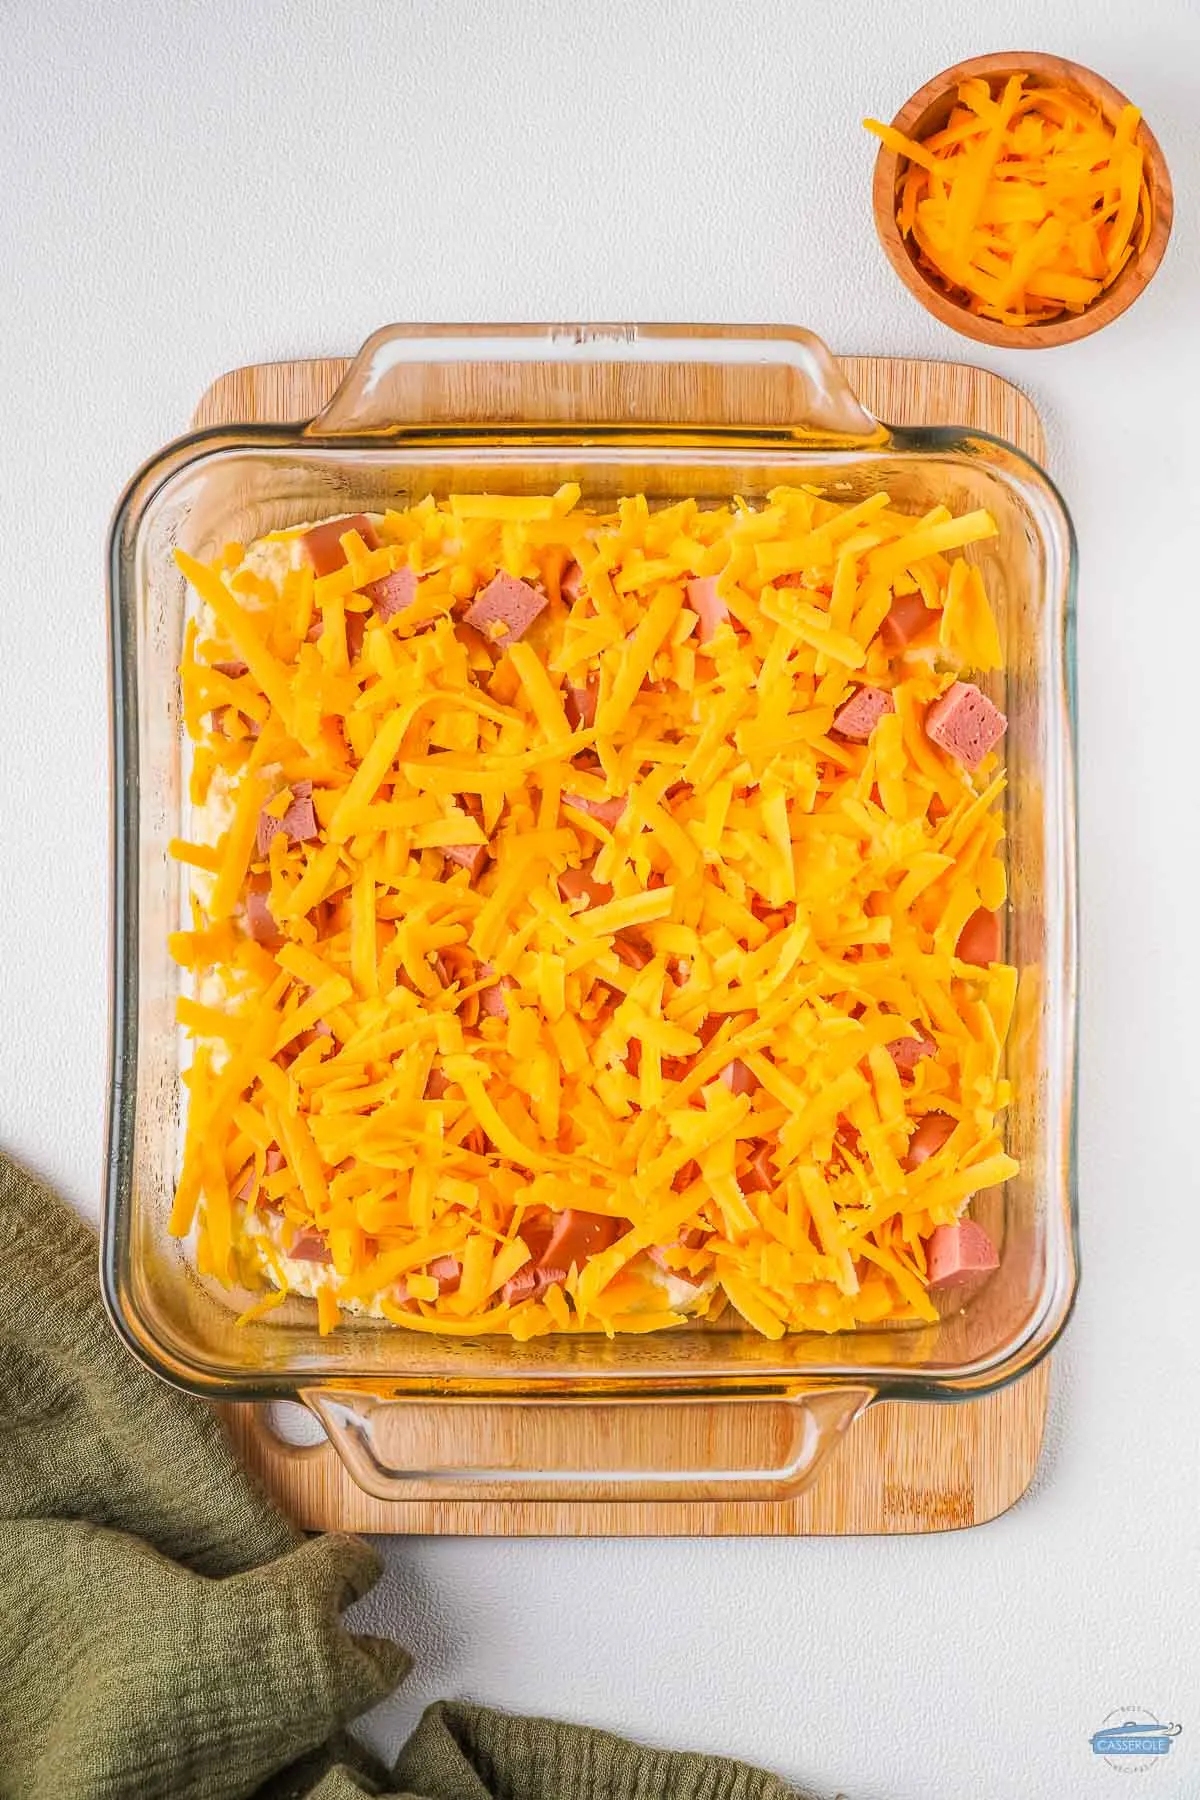 cup of cheddar cheese in a casserole dish